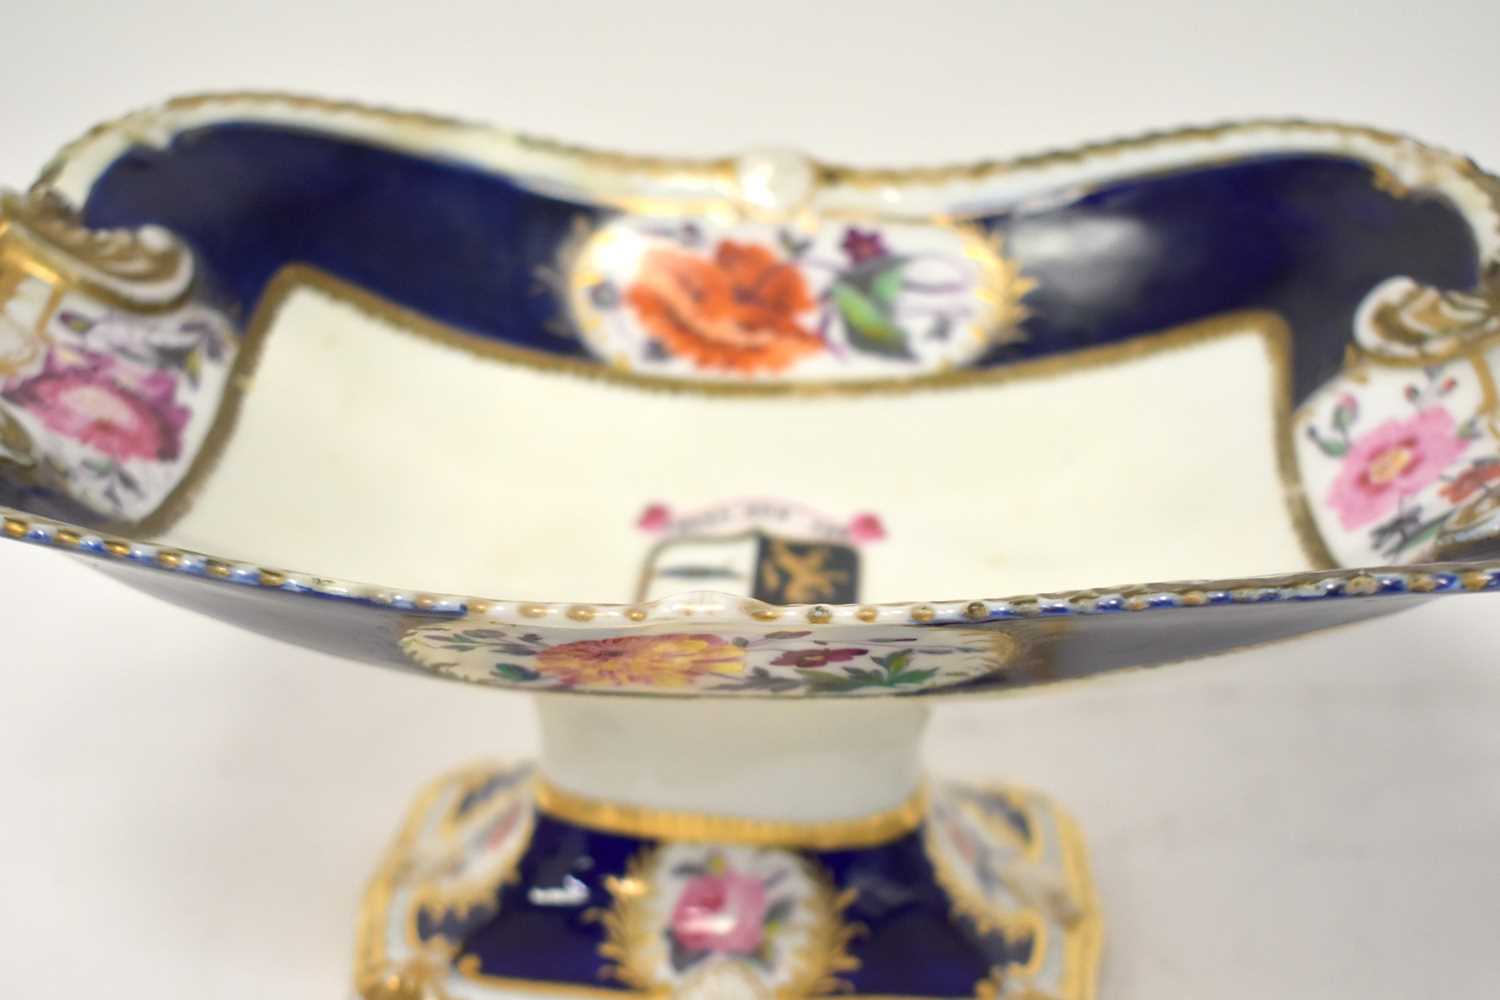 A LARGE EARLY 19TH CENTURY CHAMBERLAINS WORCESTER PORCELAIN PEDESTAL ARMORIAL COMPORT painted with - Image 12 of 12